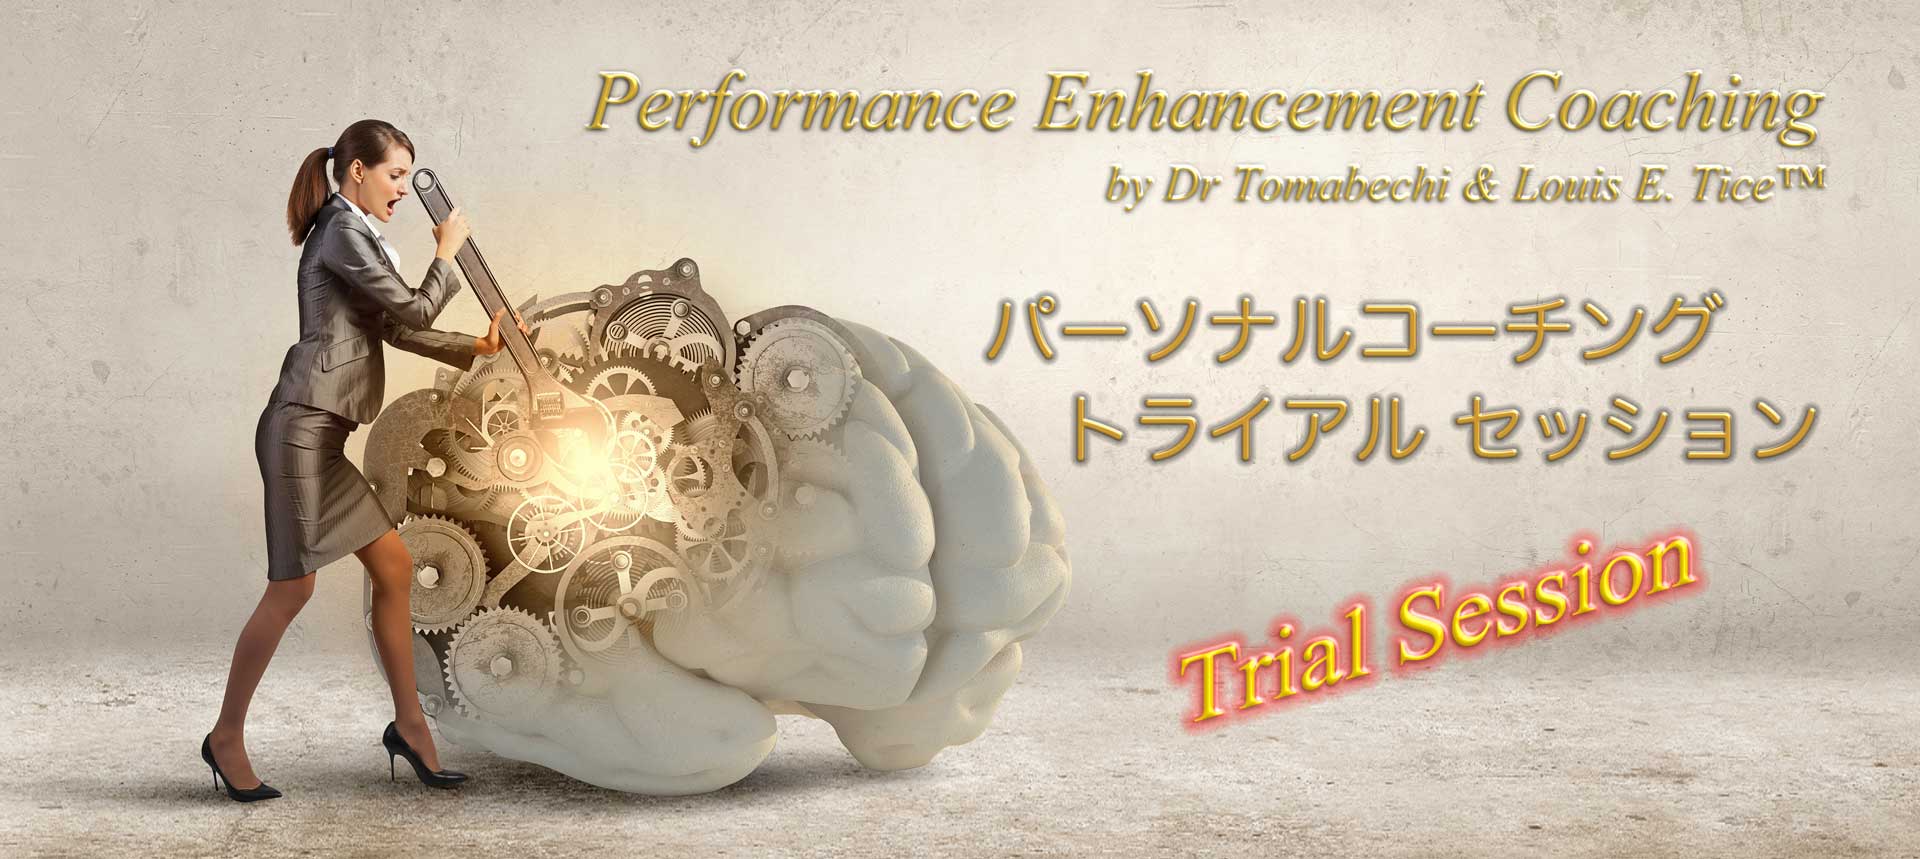 Performance Enhancement Coaching by Dr Tomabechi & Louis E. Tice™